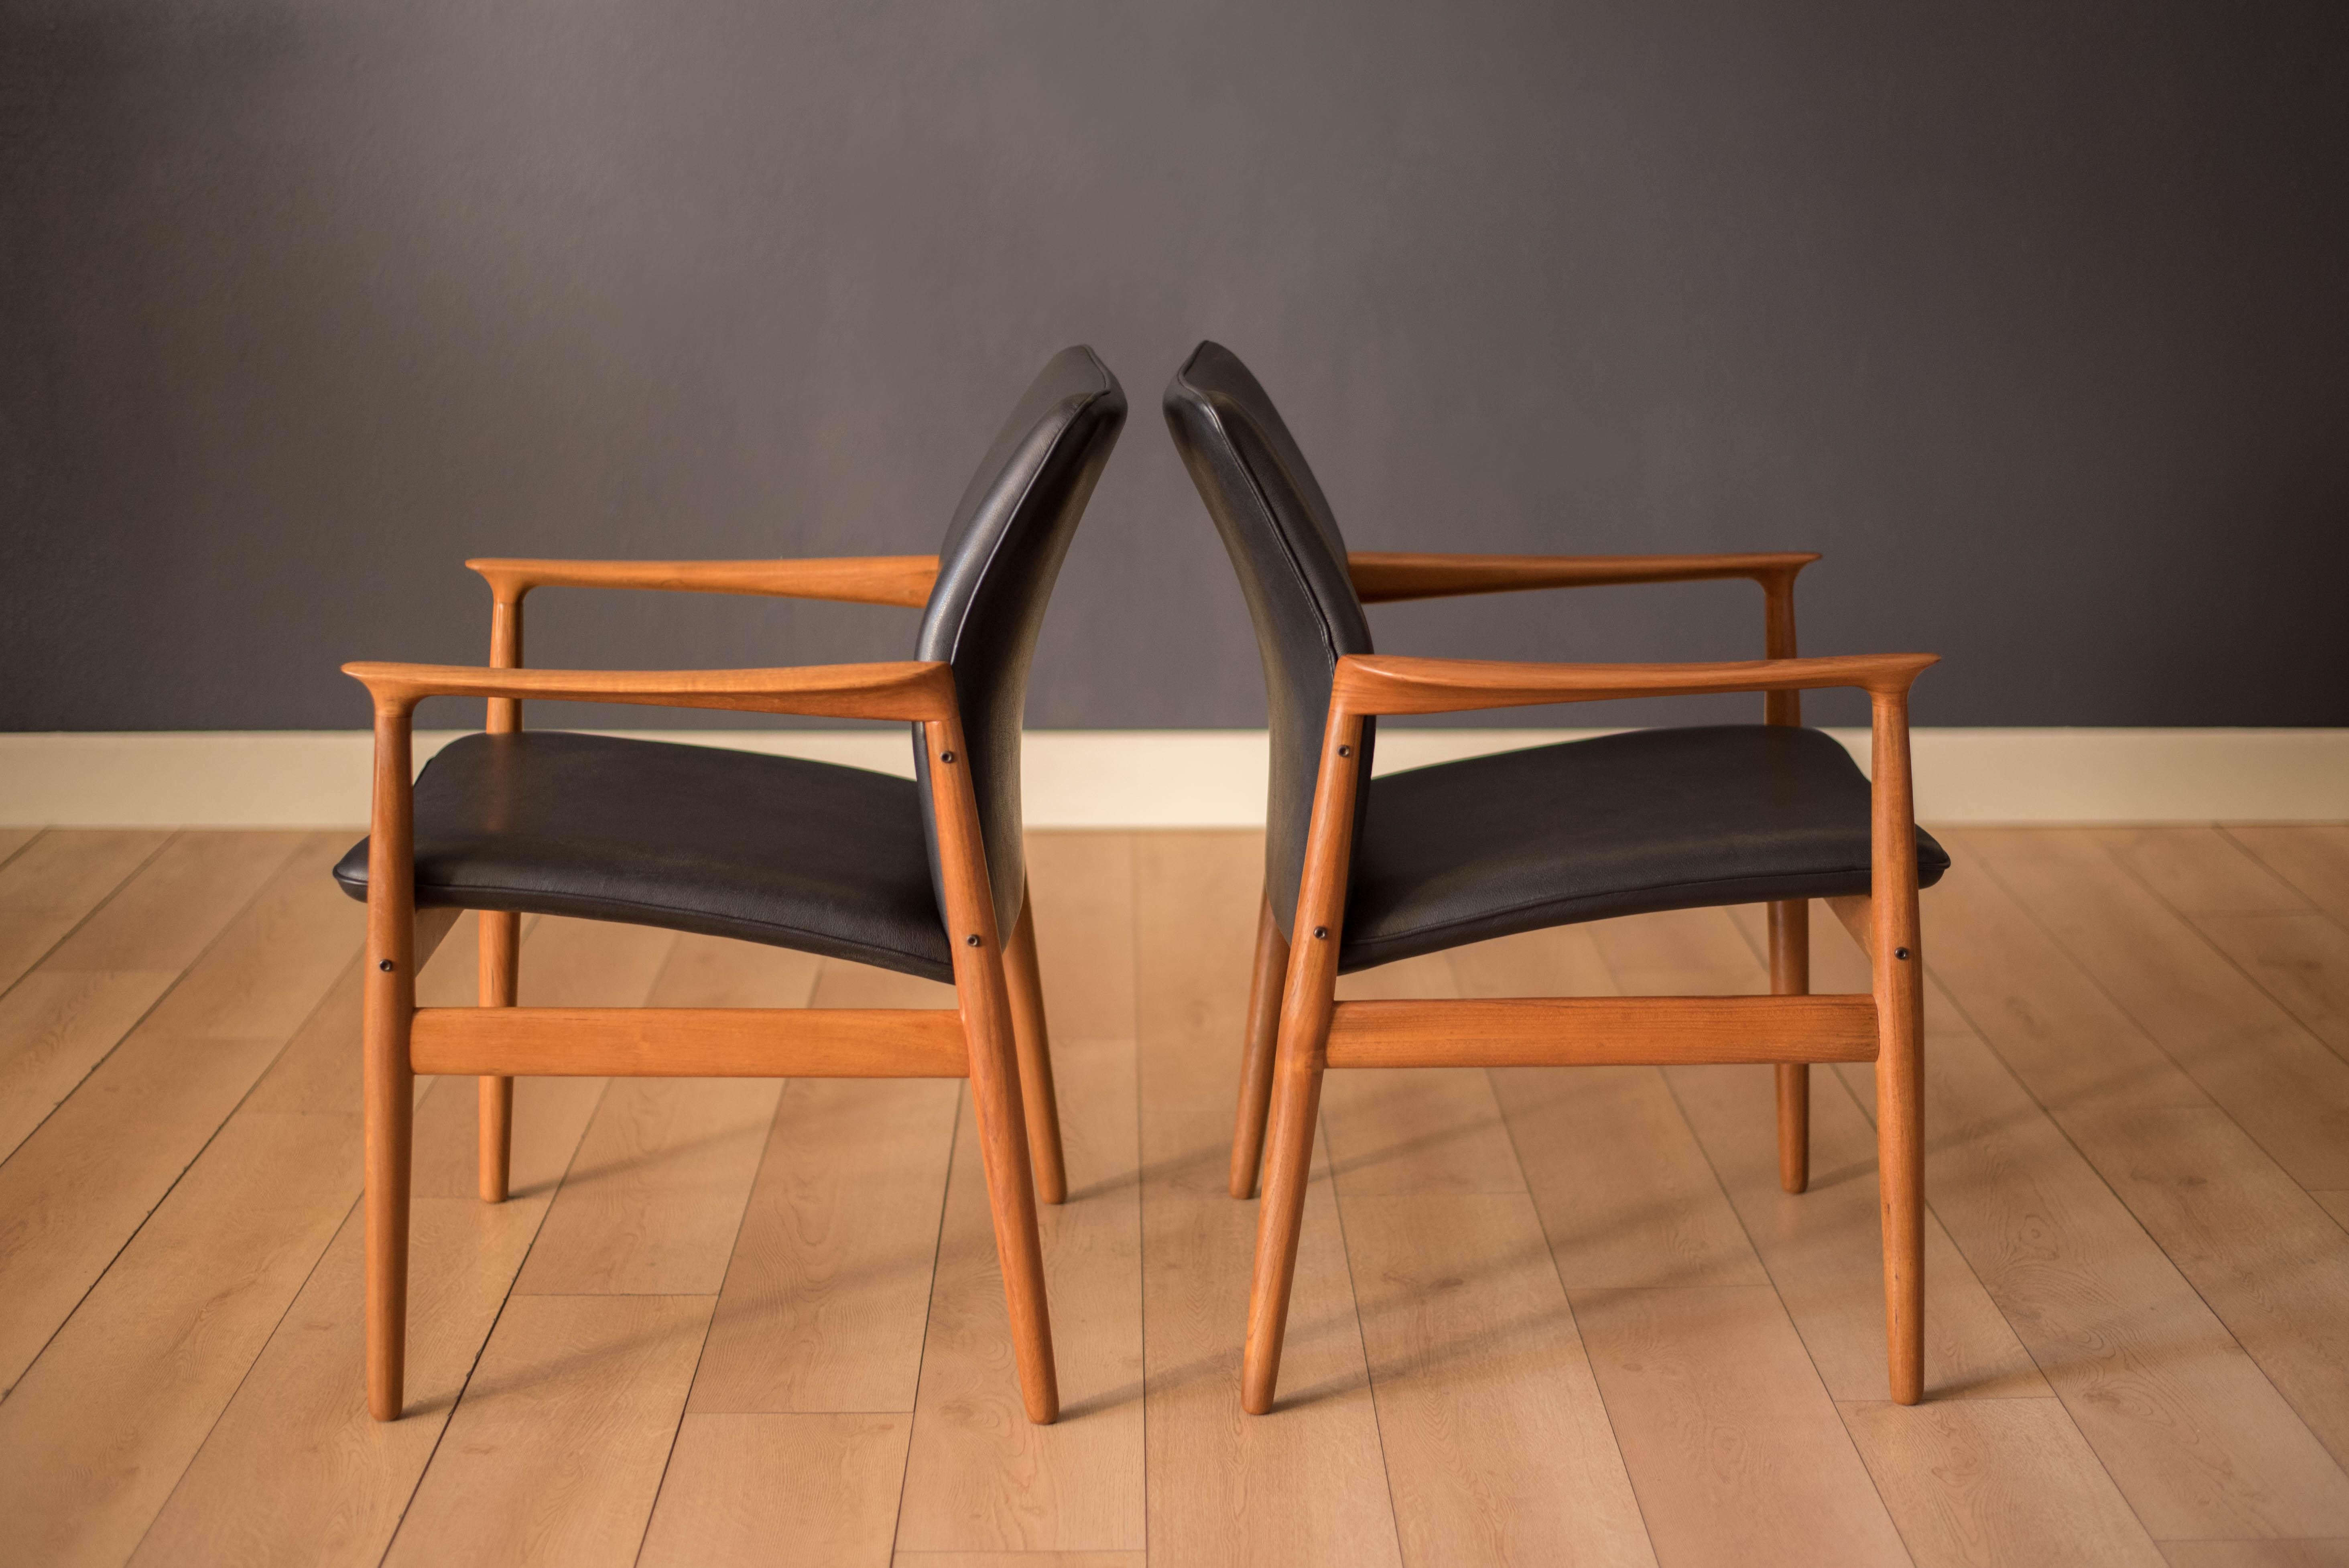 Scandinavian Modern Pair of Vintage Danish Teak and Leather Armchairs by Grete Jalk for Glostrup For Sale